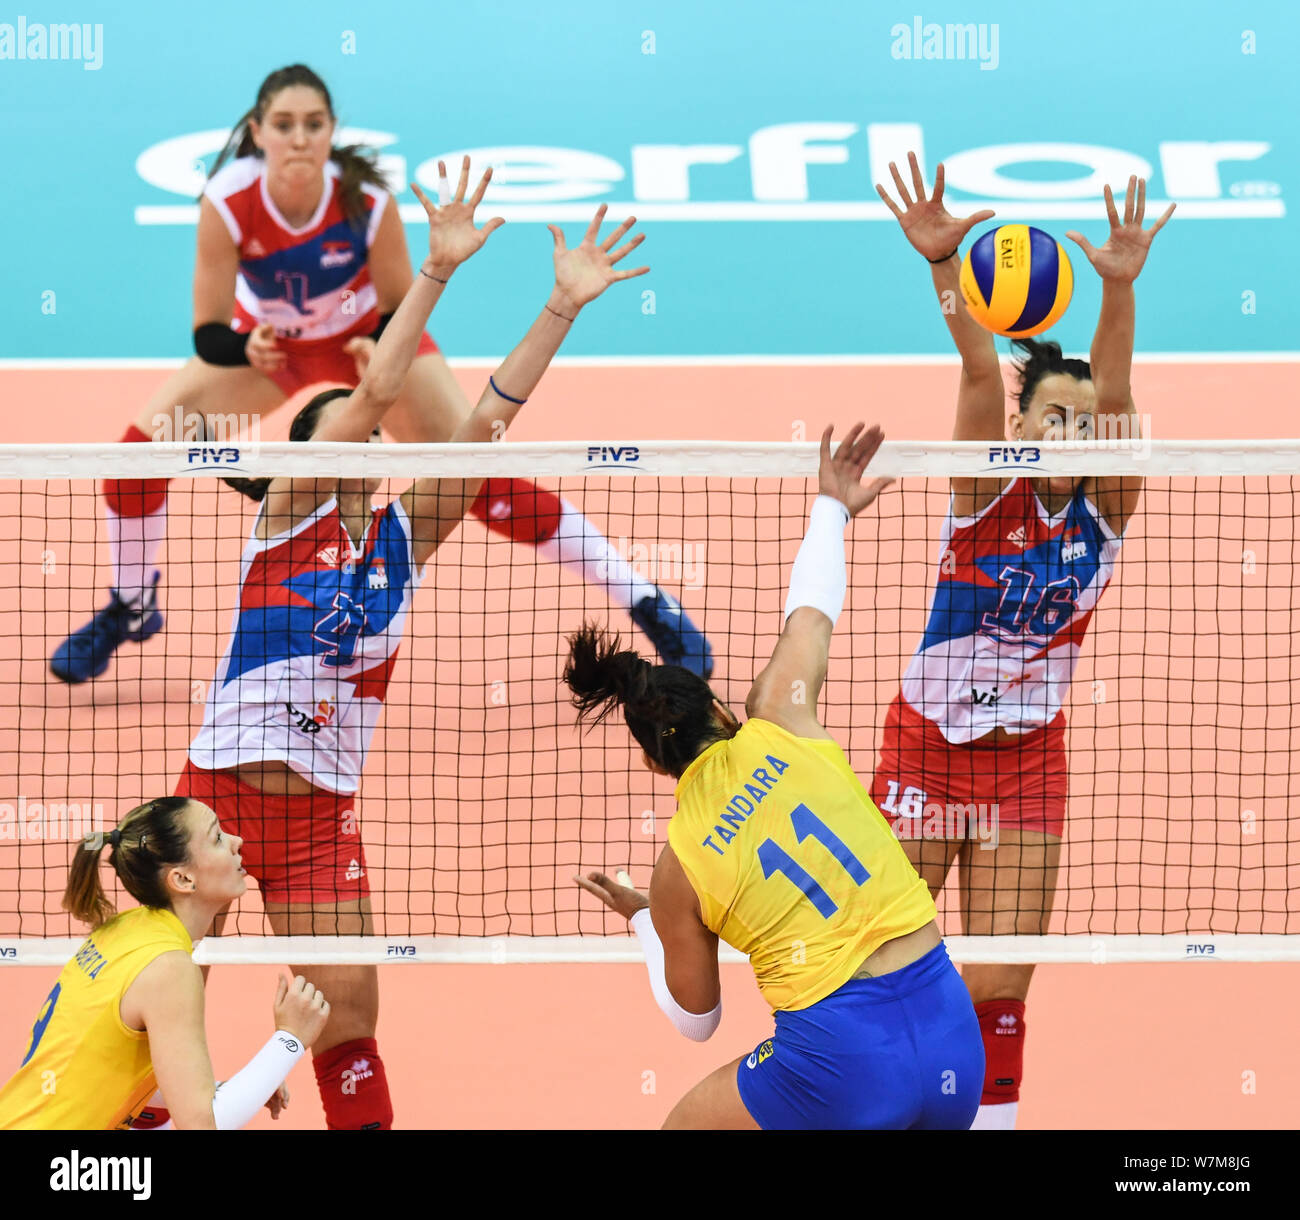 Tandara Caixeta of Brazil spikes against Bojana Zivkovic and Milena Rasic of Serbia during their match of the FIVB Volleyball World Grand Prix Finals Stock Photo